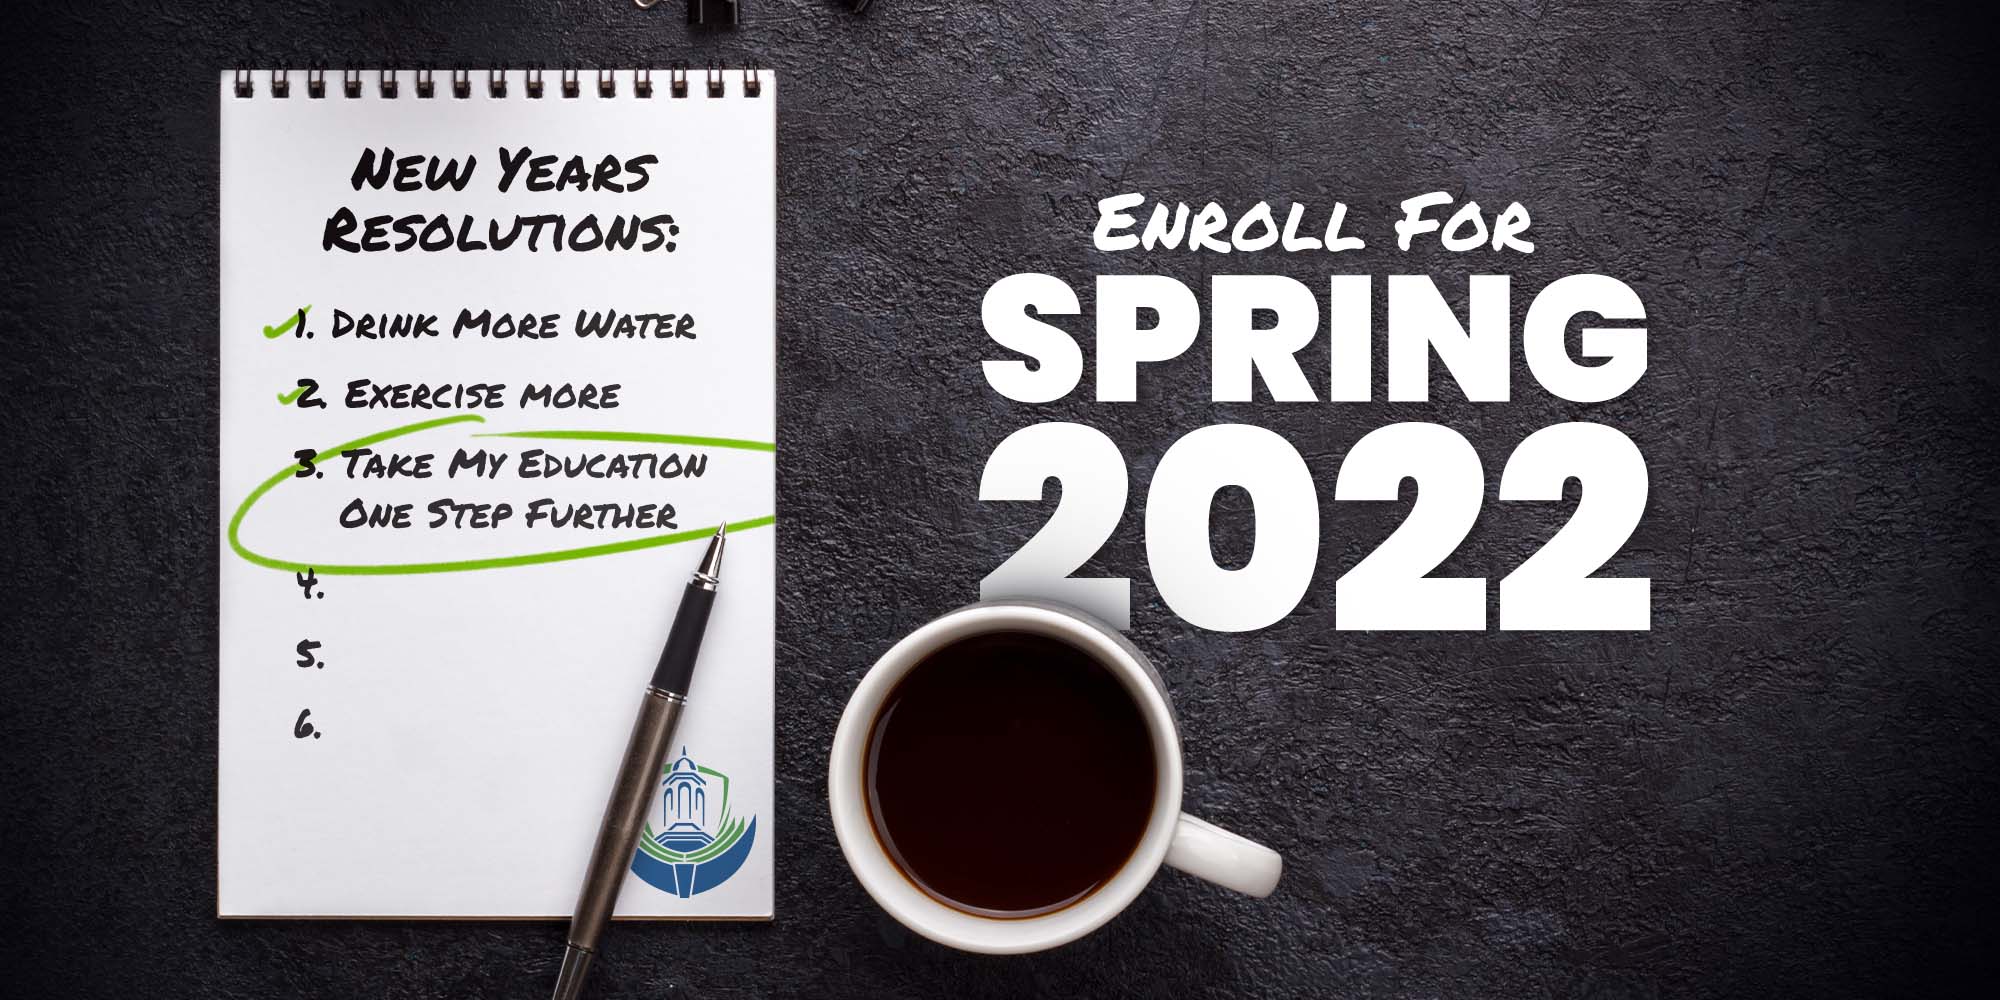 Spring Registration  Time to Enroll Now